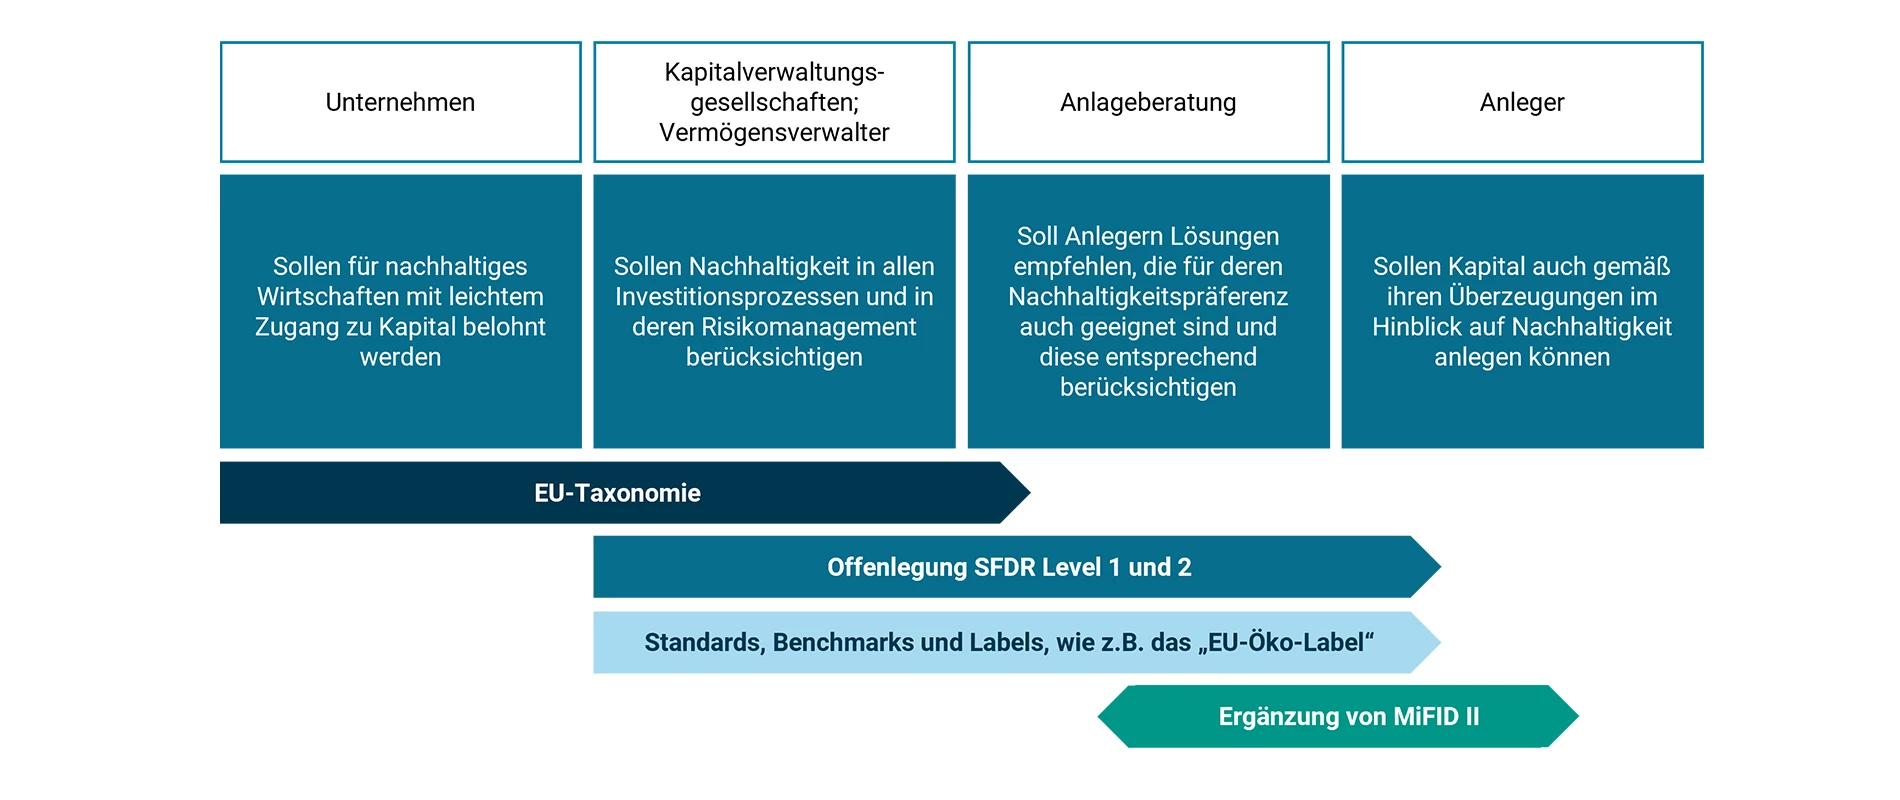 Ger Infographic ESG Parties Involved